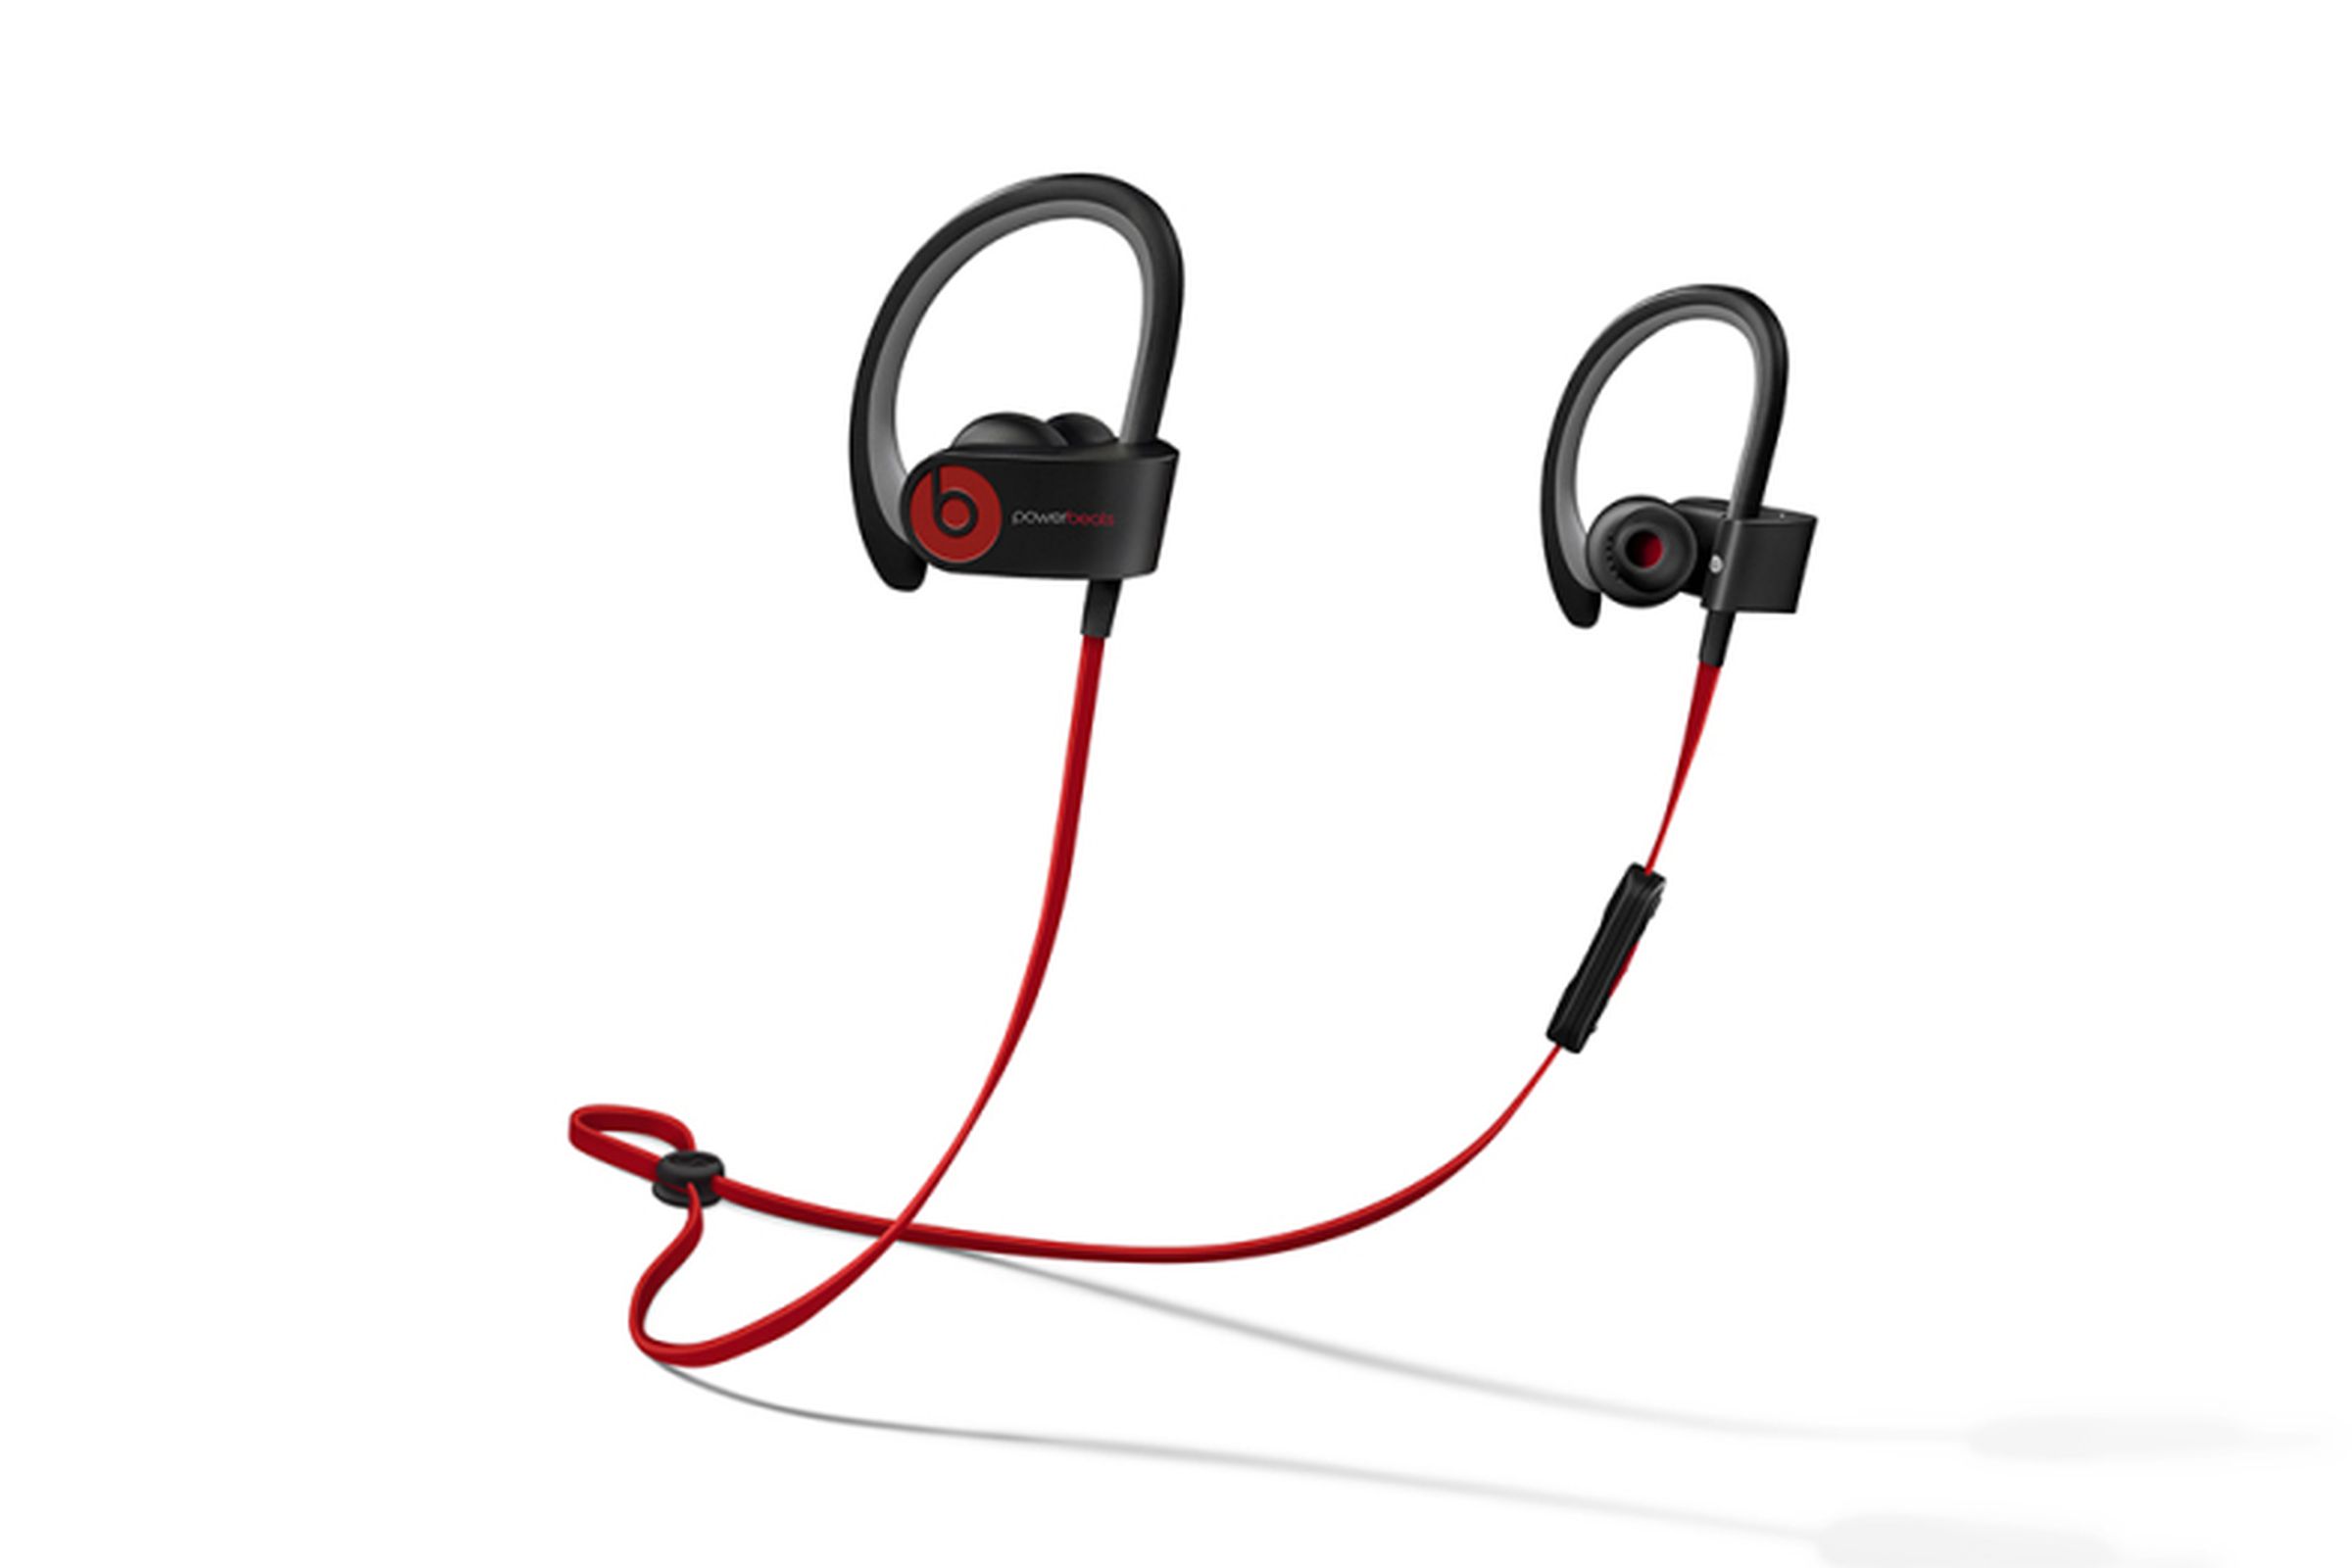 The Powerbeats 2 were first released back in 2014.